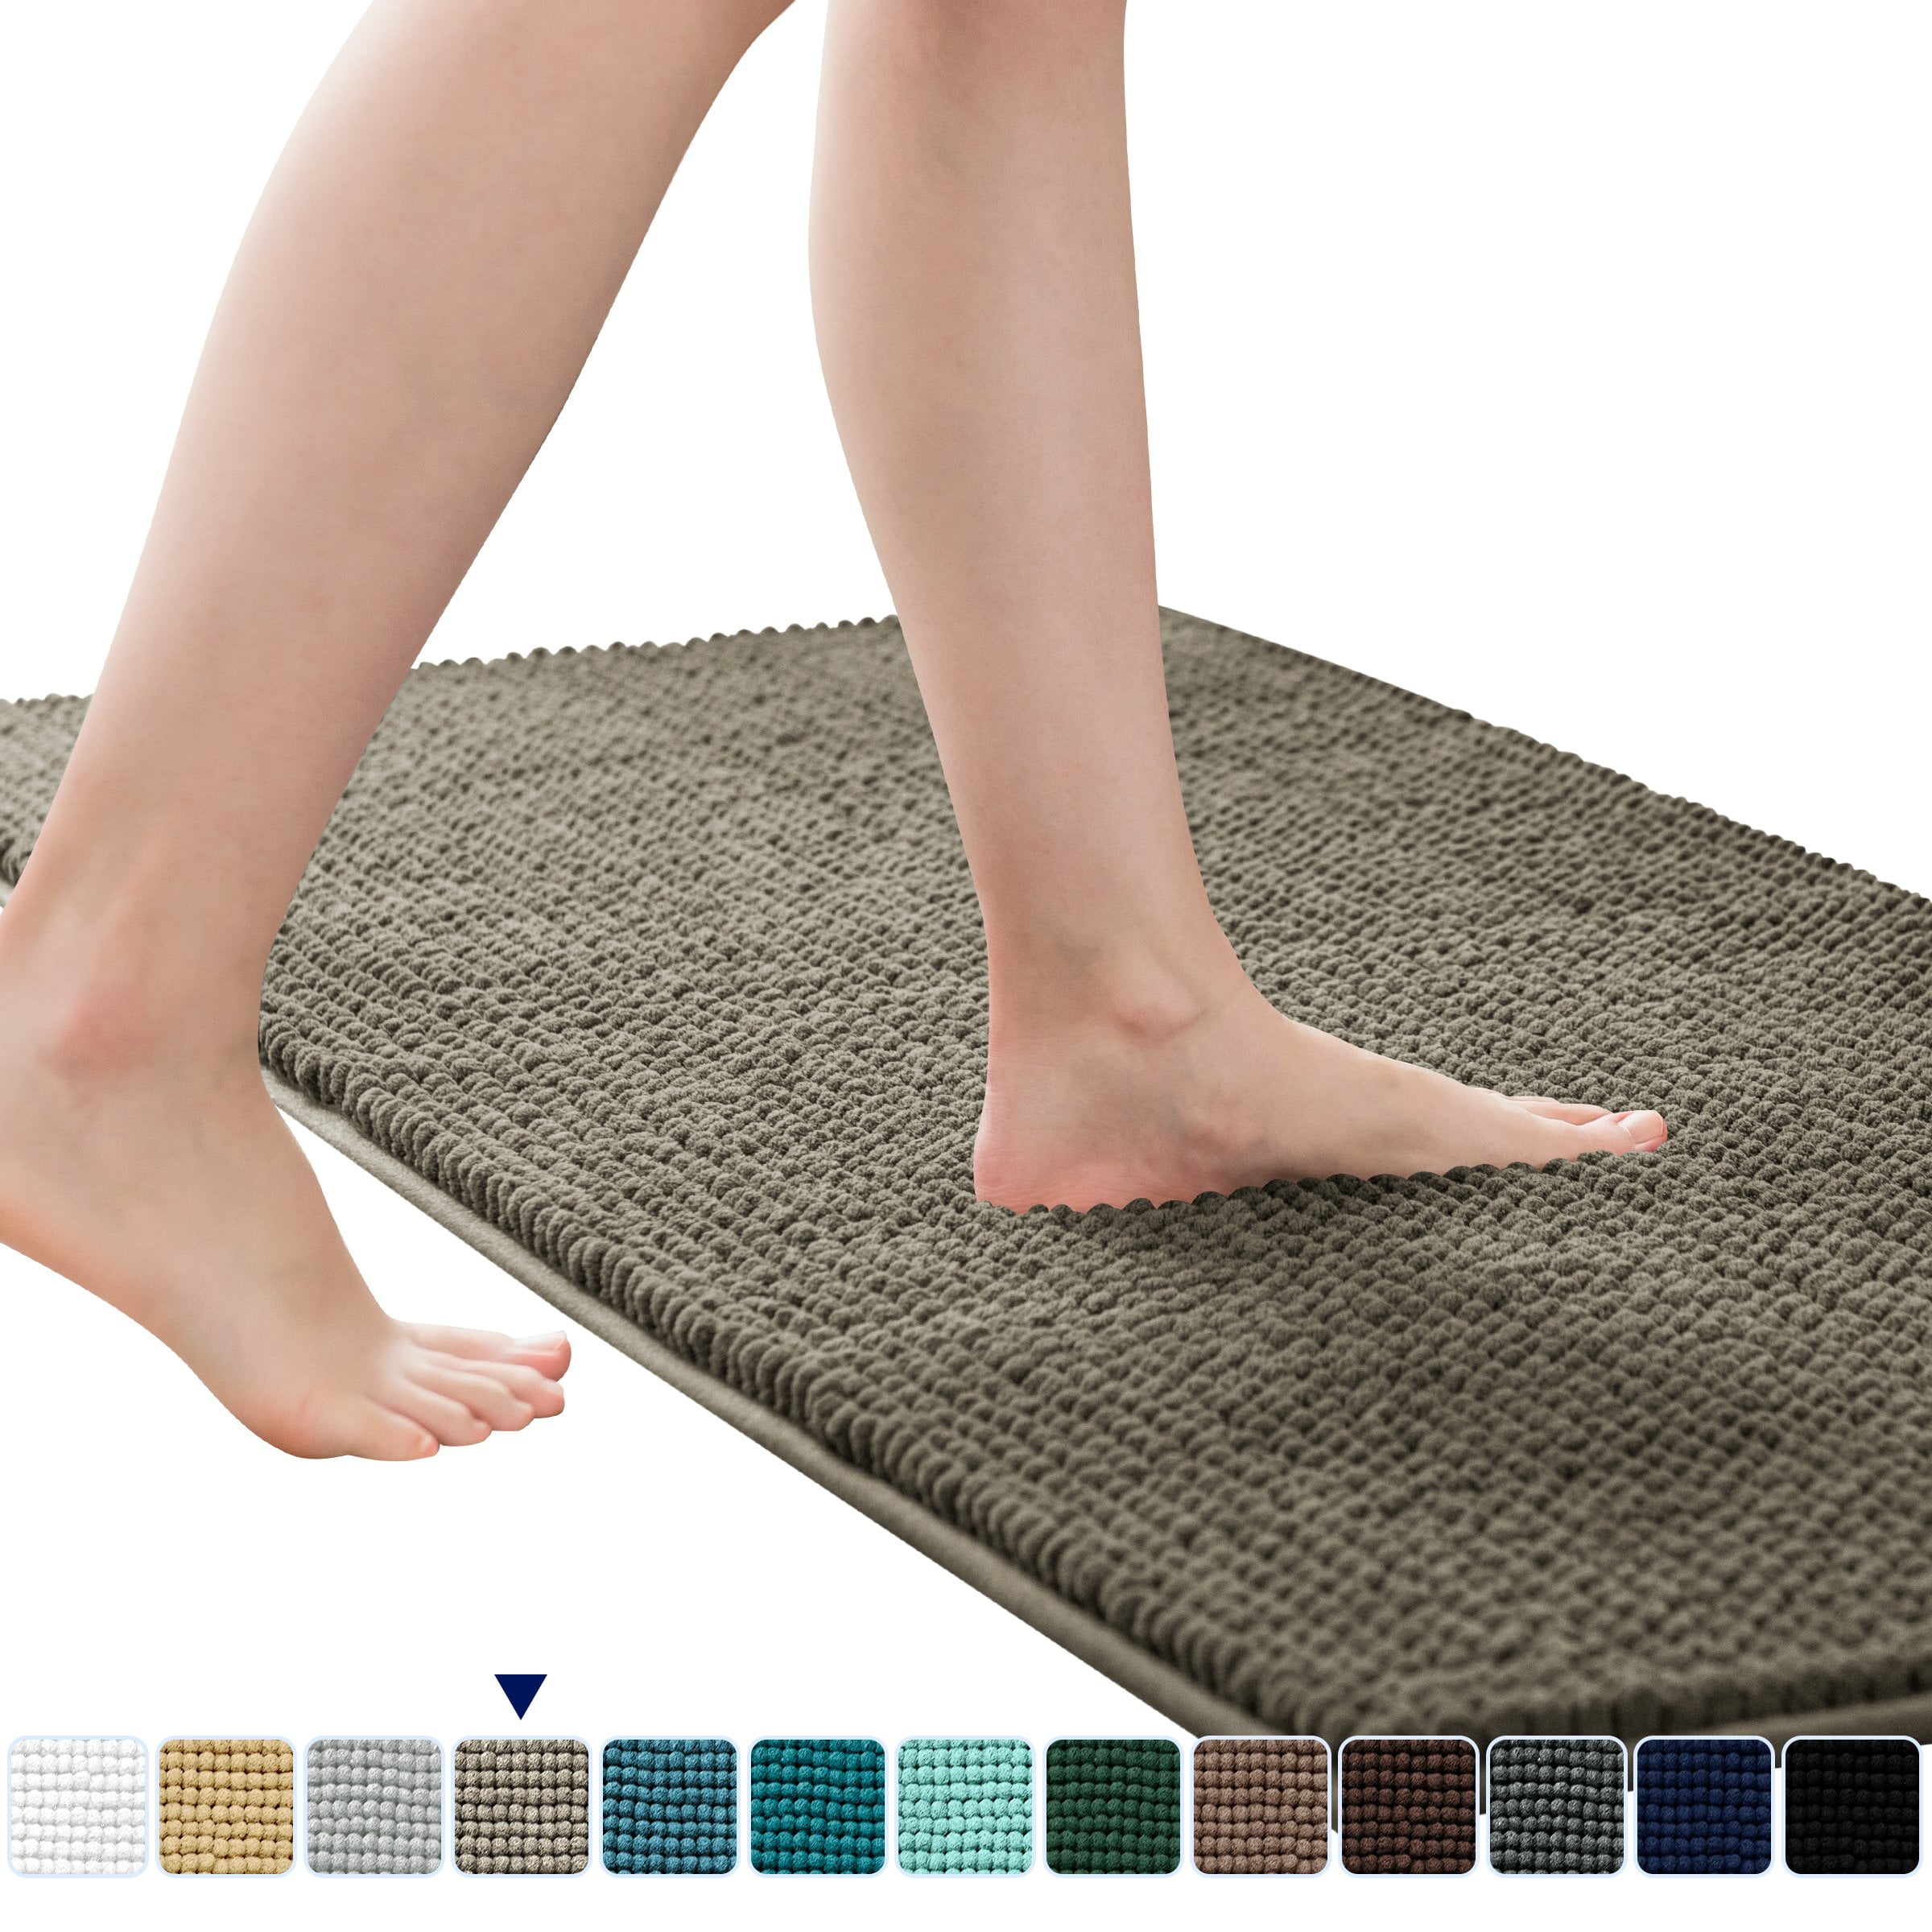 Ebern Designs Extra Soft And Absorbent Shaggy Bathroom Mat Rugs